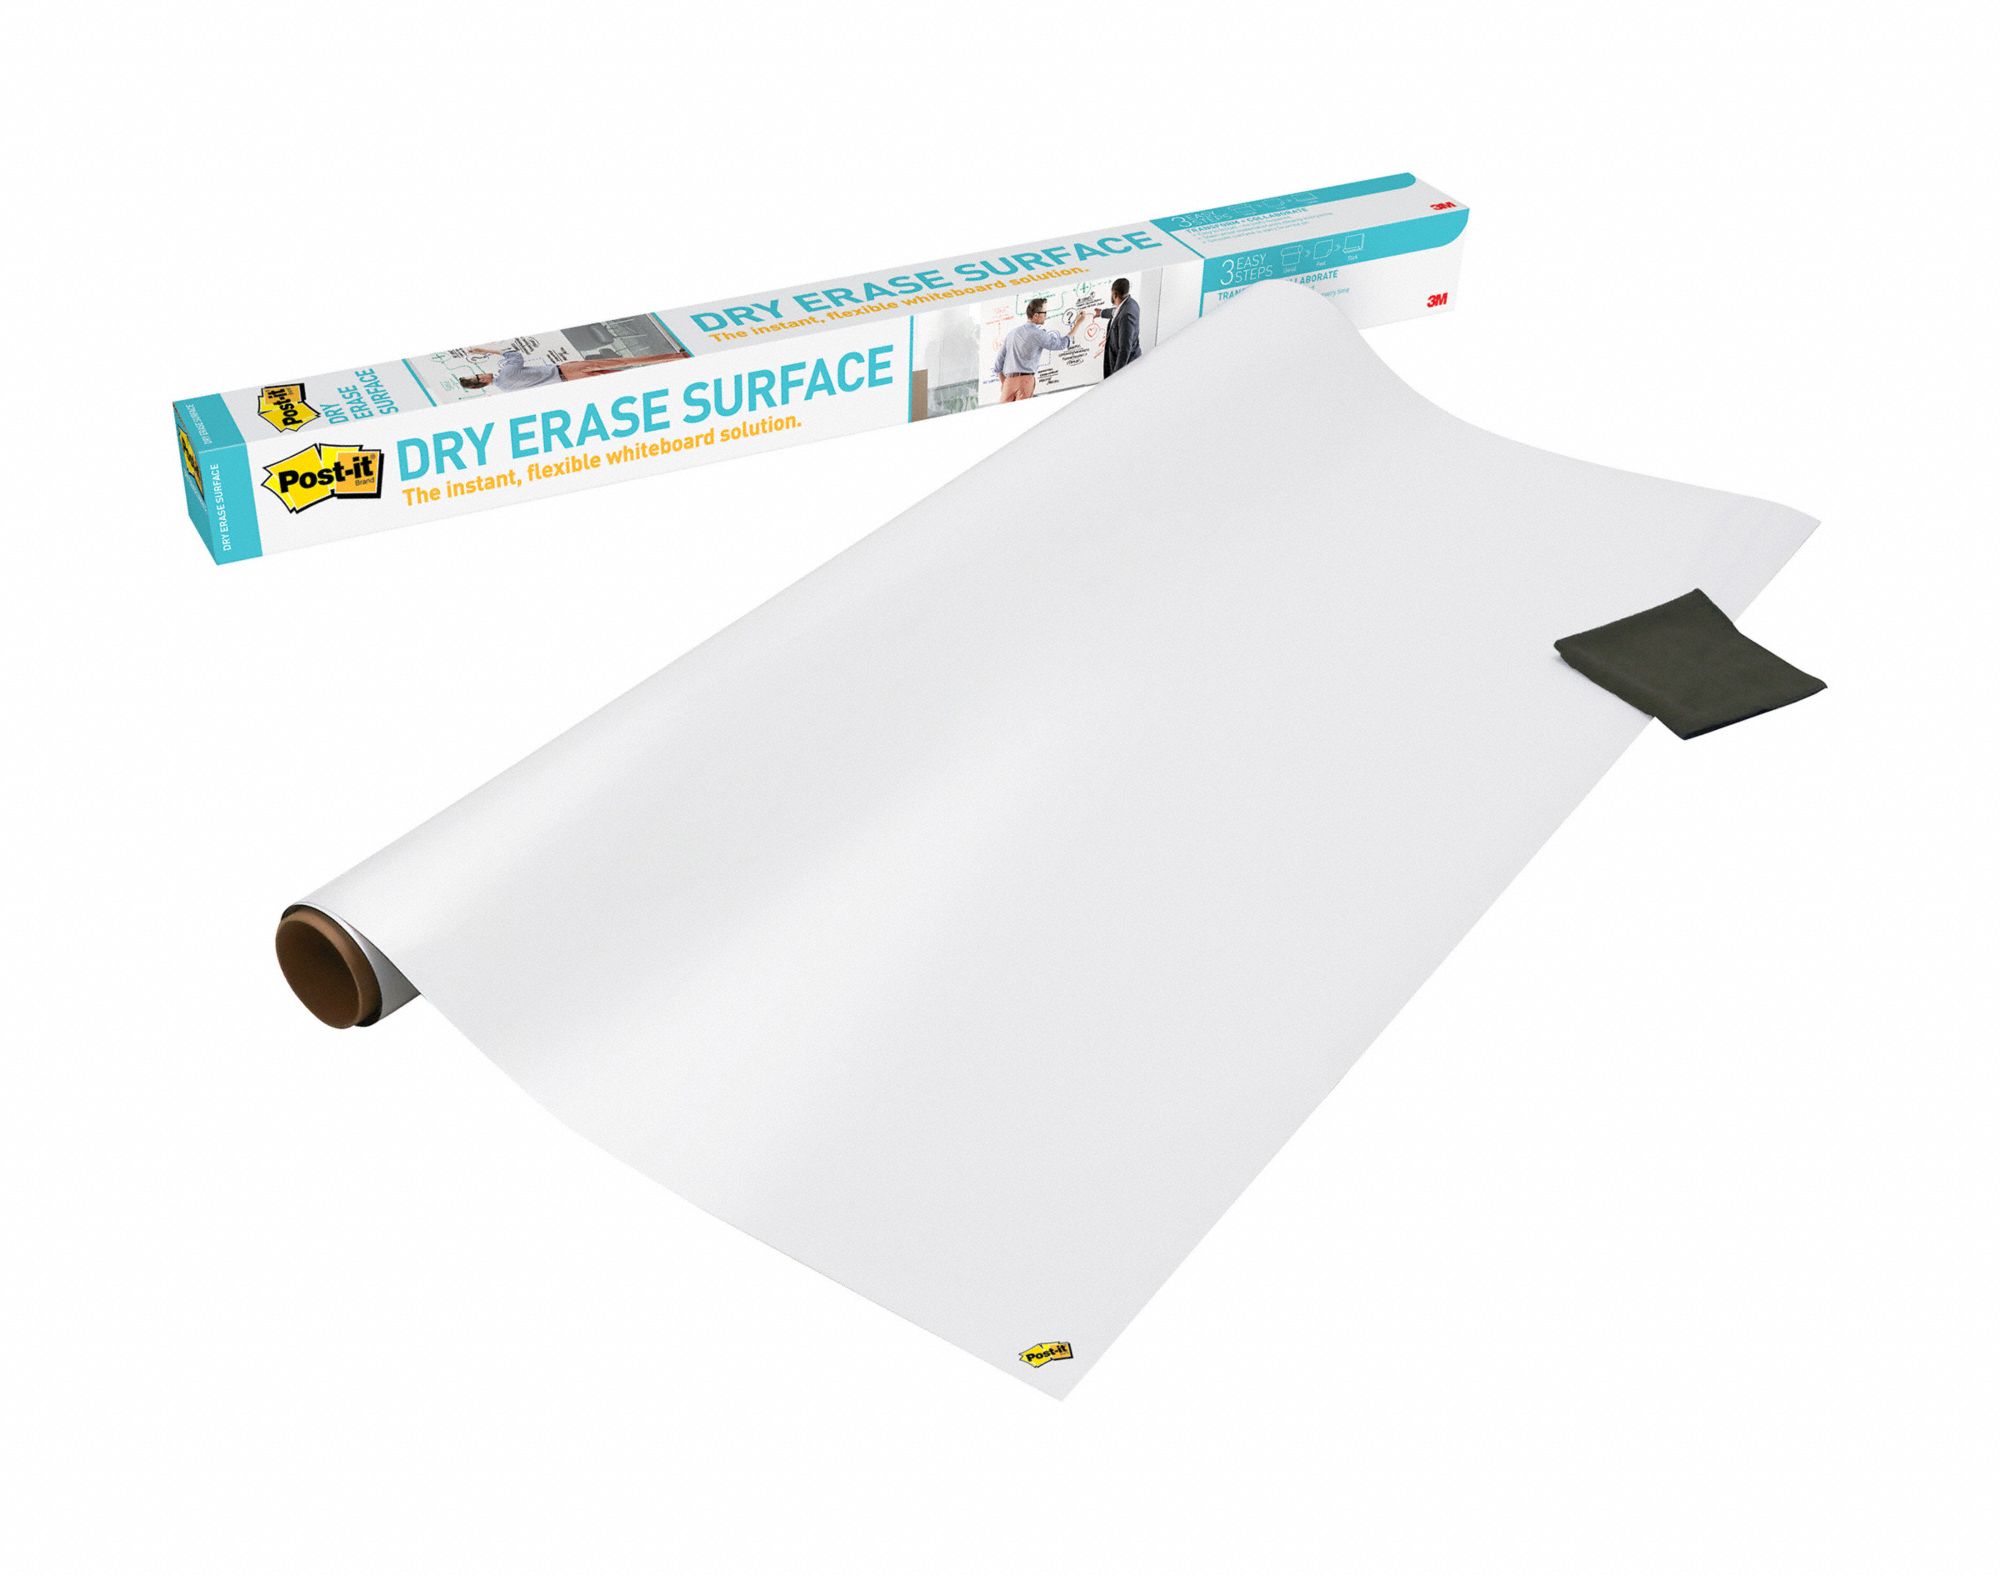 Post-it Super Sticky Dry Erase Surface With Adhesive Backing, White